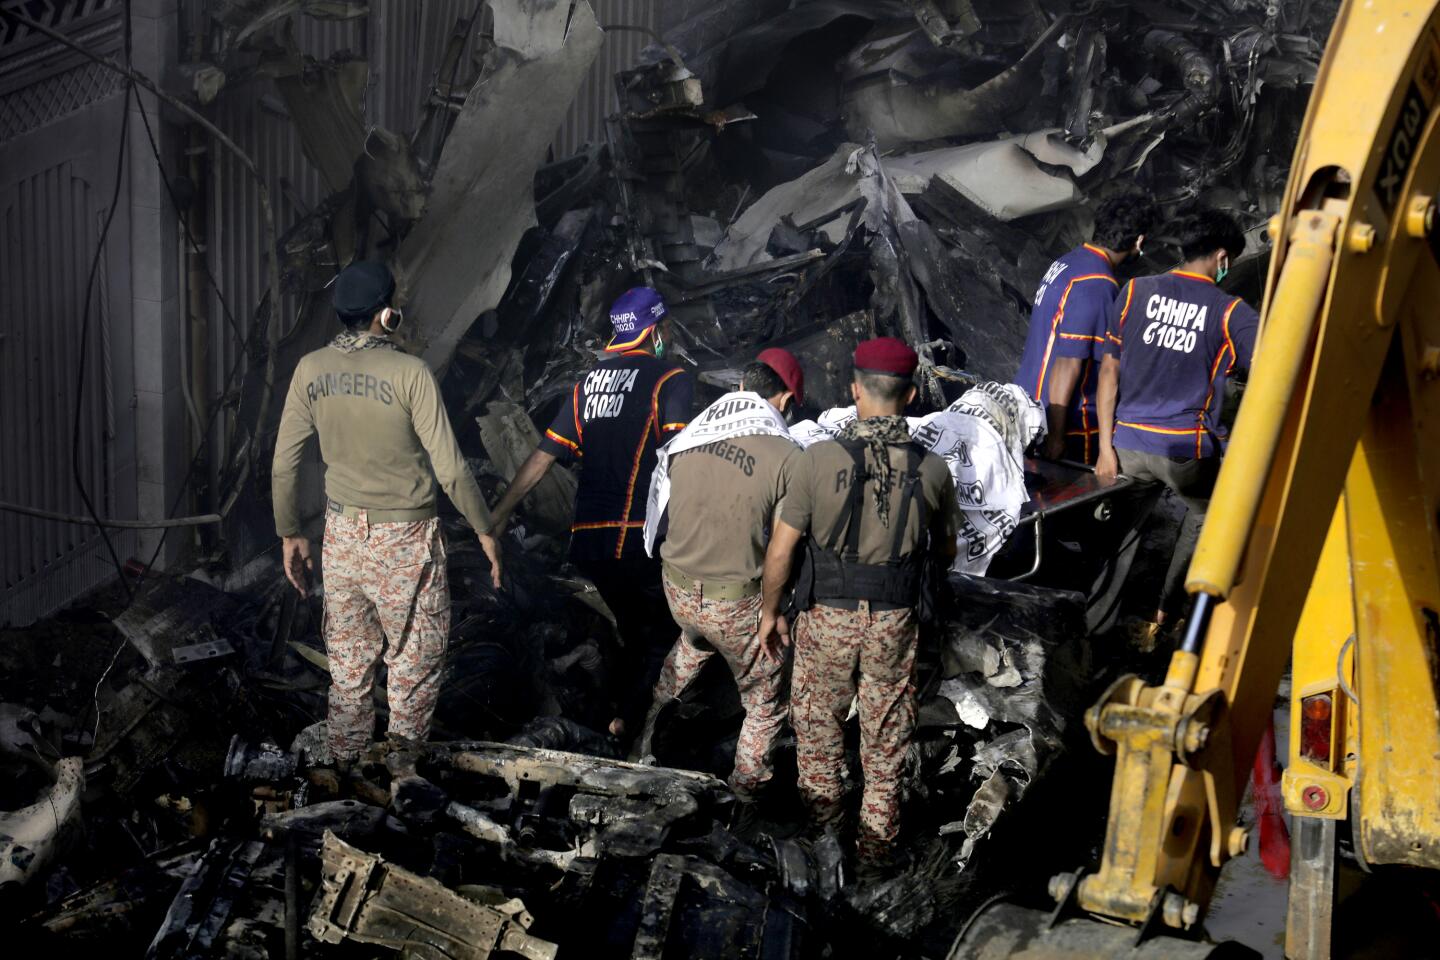 Emergency workers retrieve a body from the wreckage of a Pakistani airliner that crashed Friday in a neighborhood in Karachi.